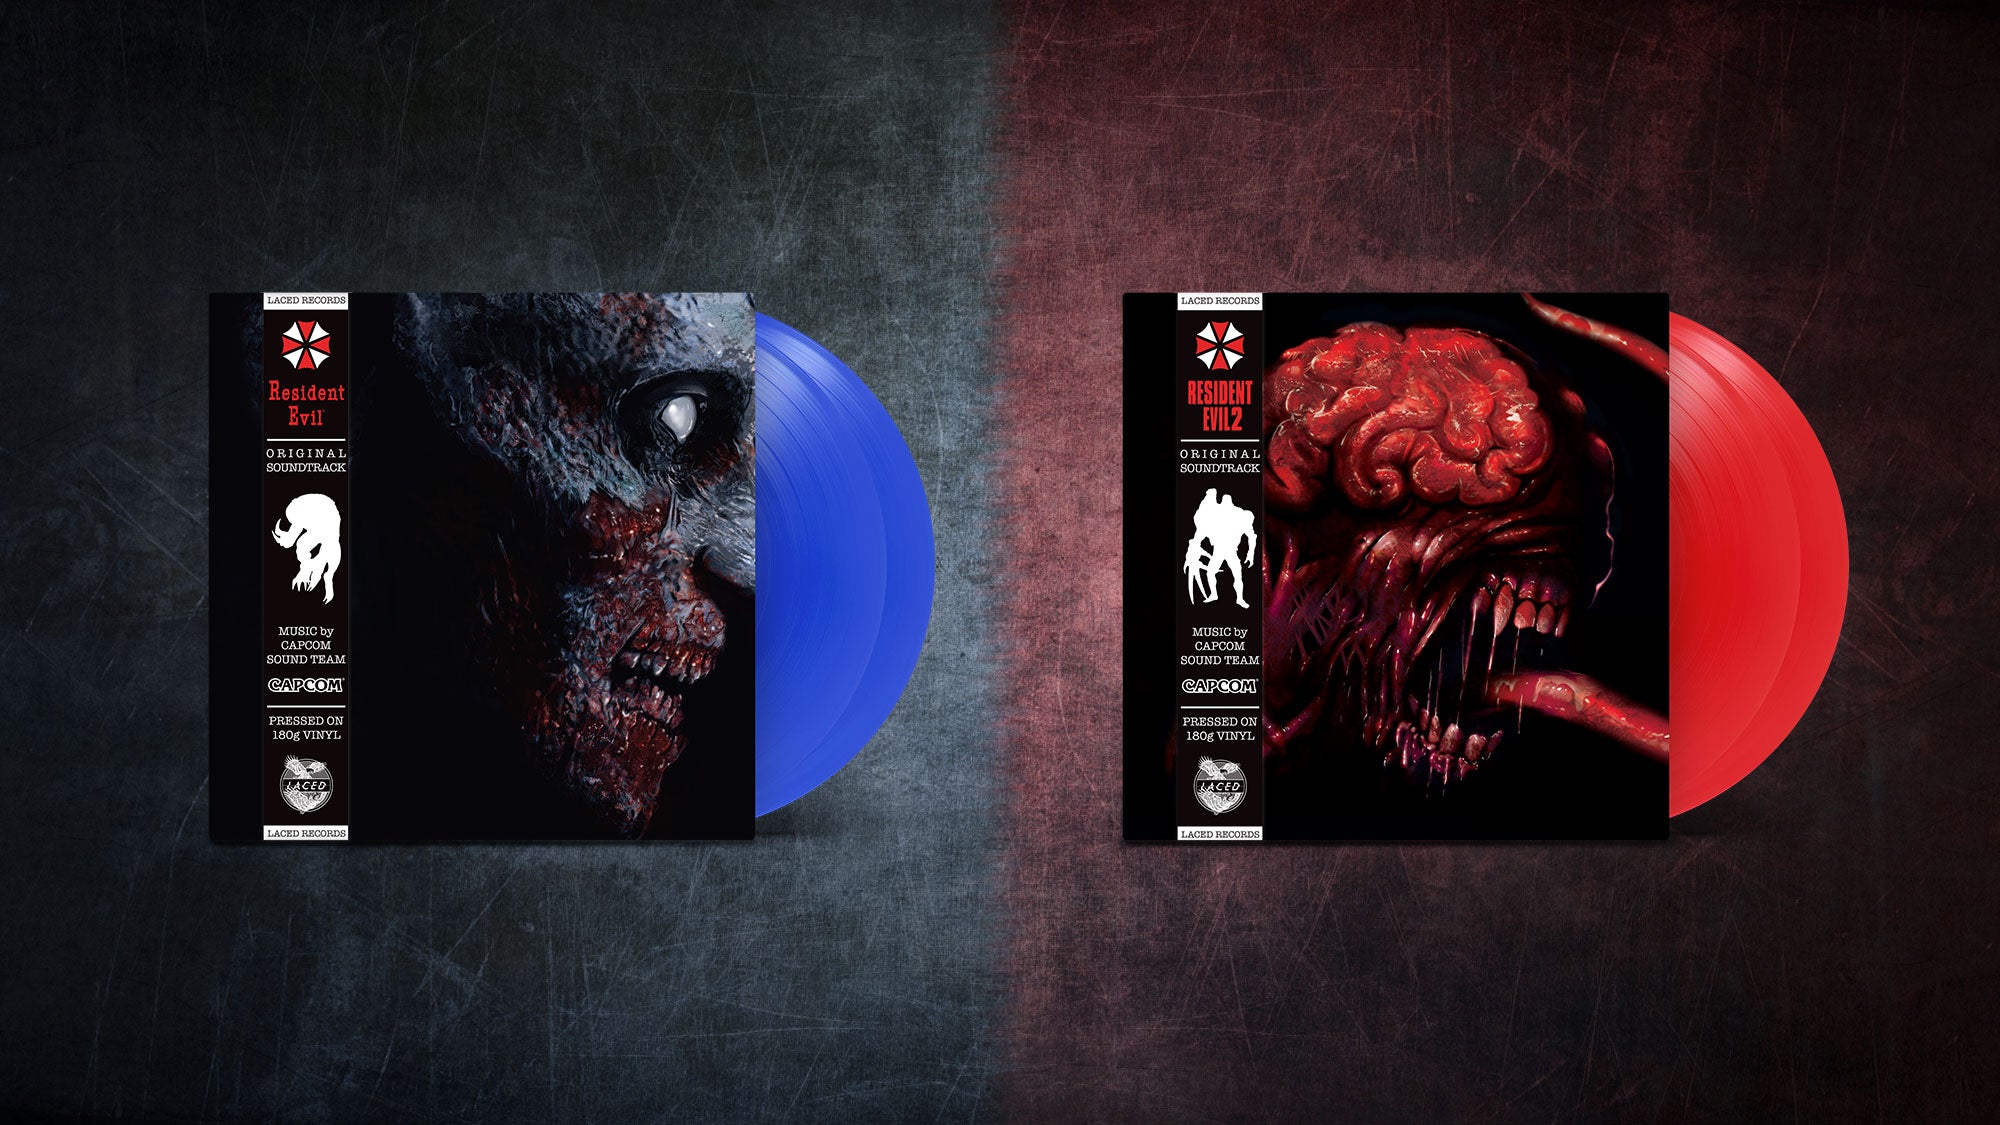 The Resident Evil 2002 and RE2 1998 soundtrack vinyl in blue and red respectively